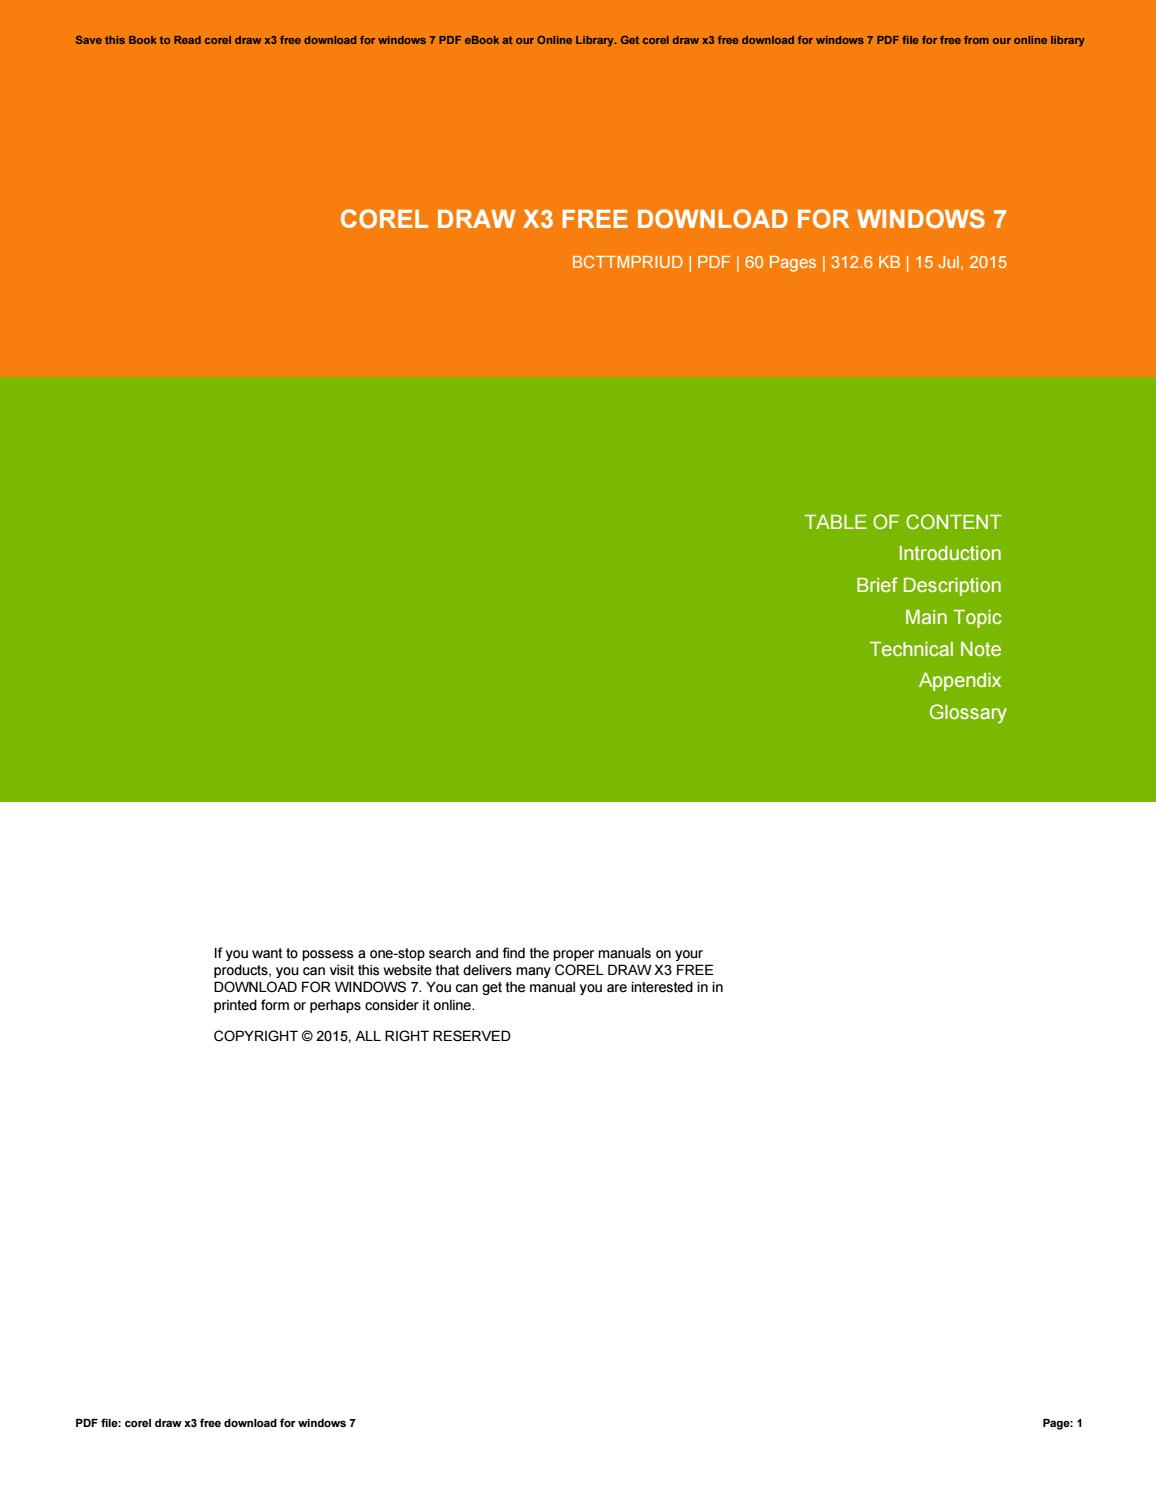 Corel Draw Download For Windows 7